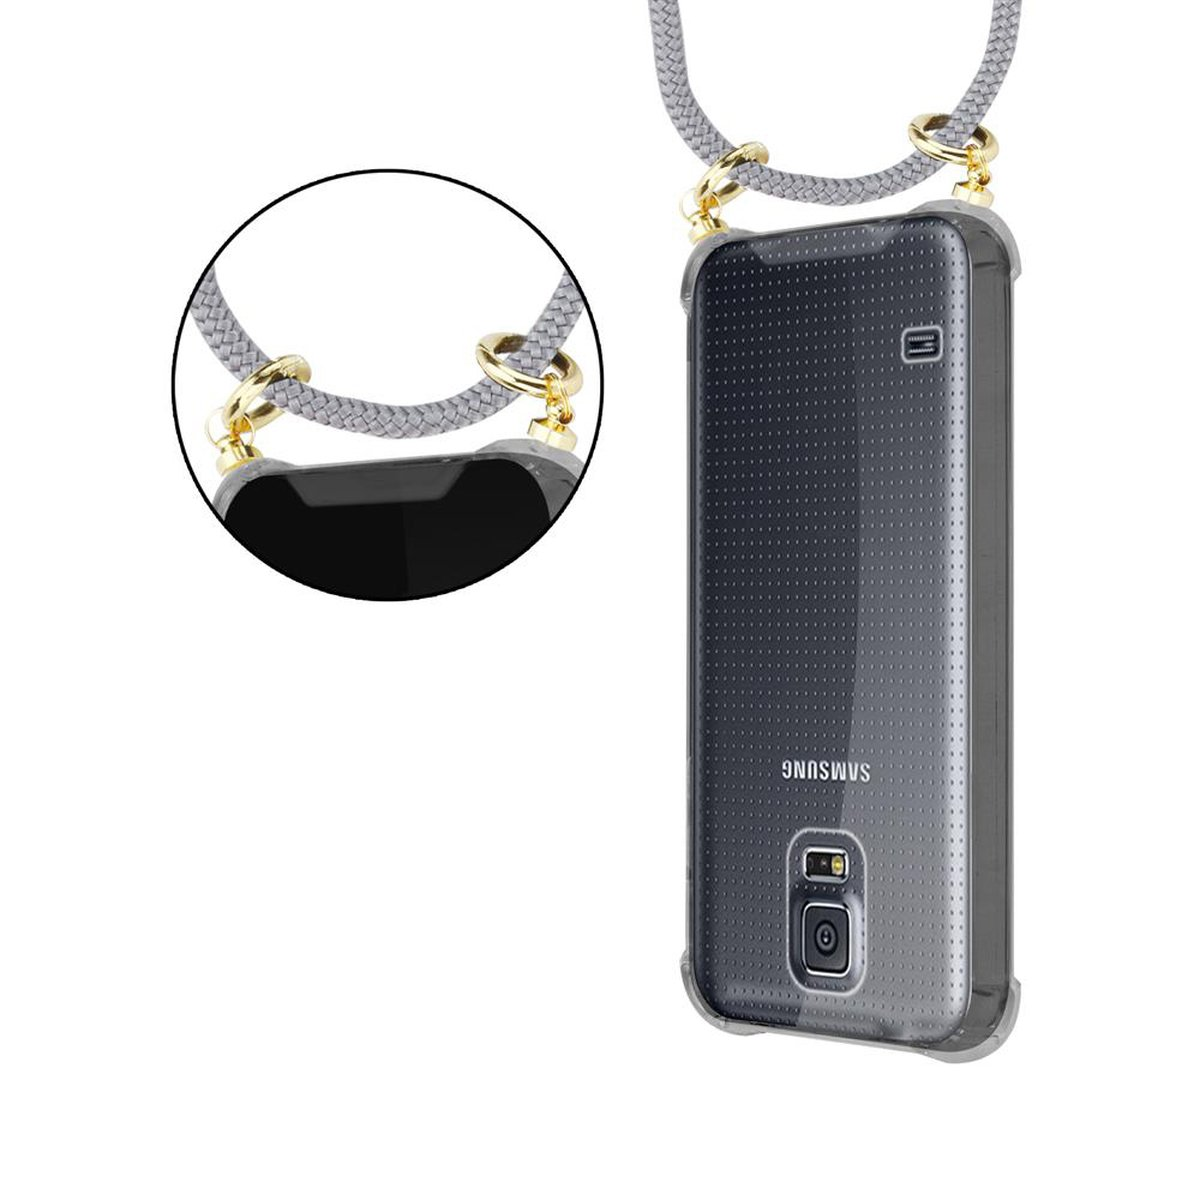 Handy S5 mit Samsung, Kette Gold Kordel Hülle, GRAU S5 Galaxy abnehmbarer Ringen, Band SILBER CADORABO und / Backcover, NEO,